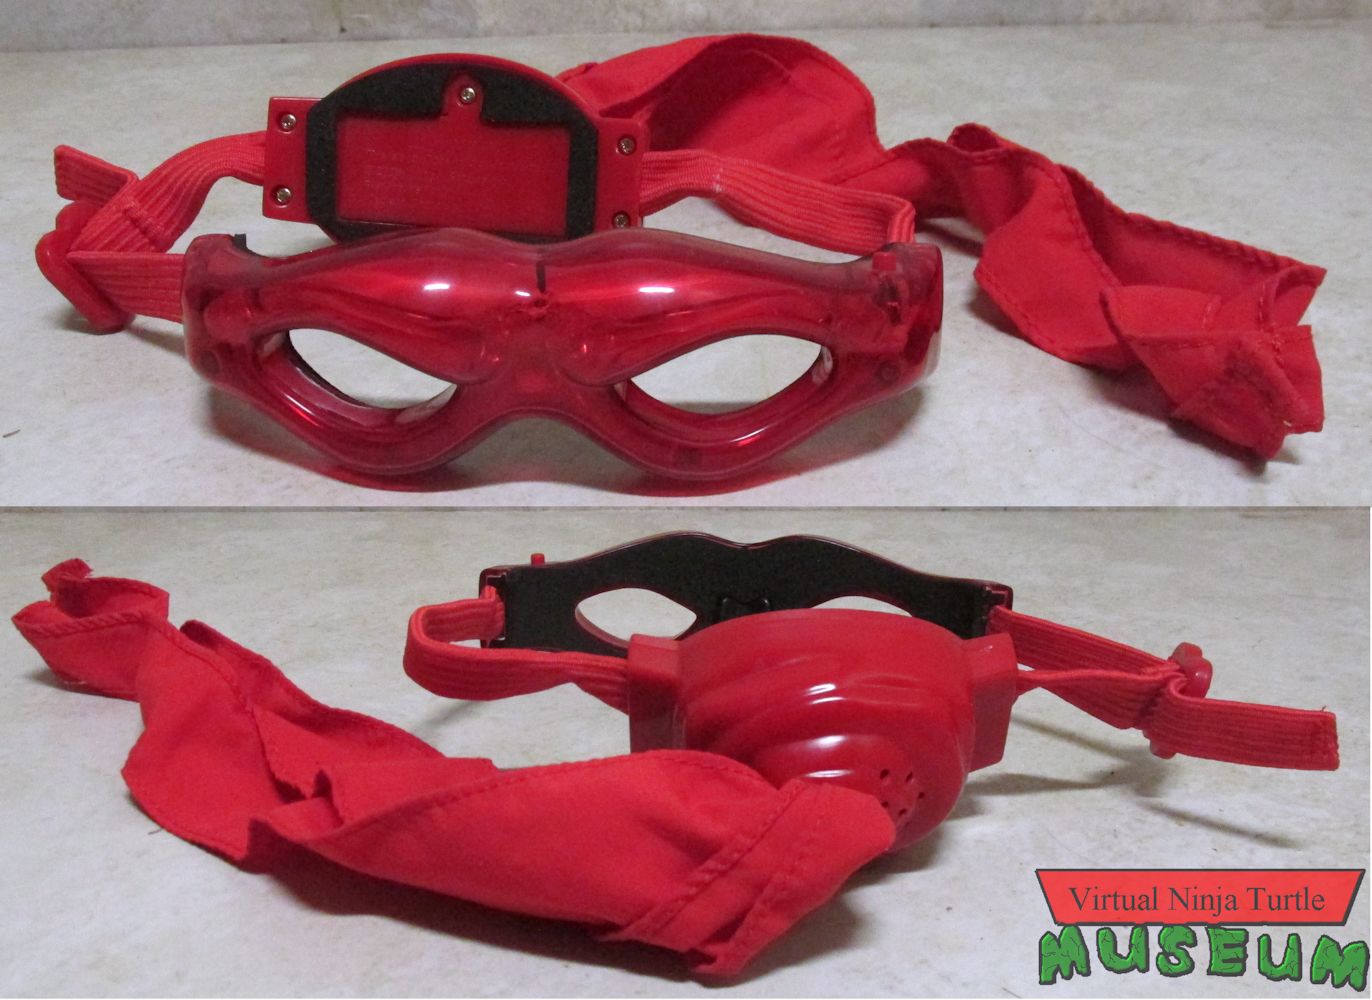 Banadana FX Raph Mask front and back